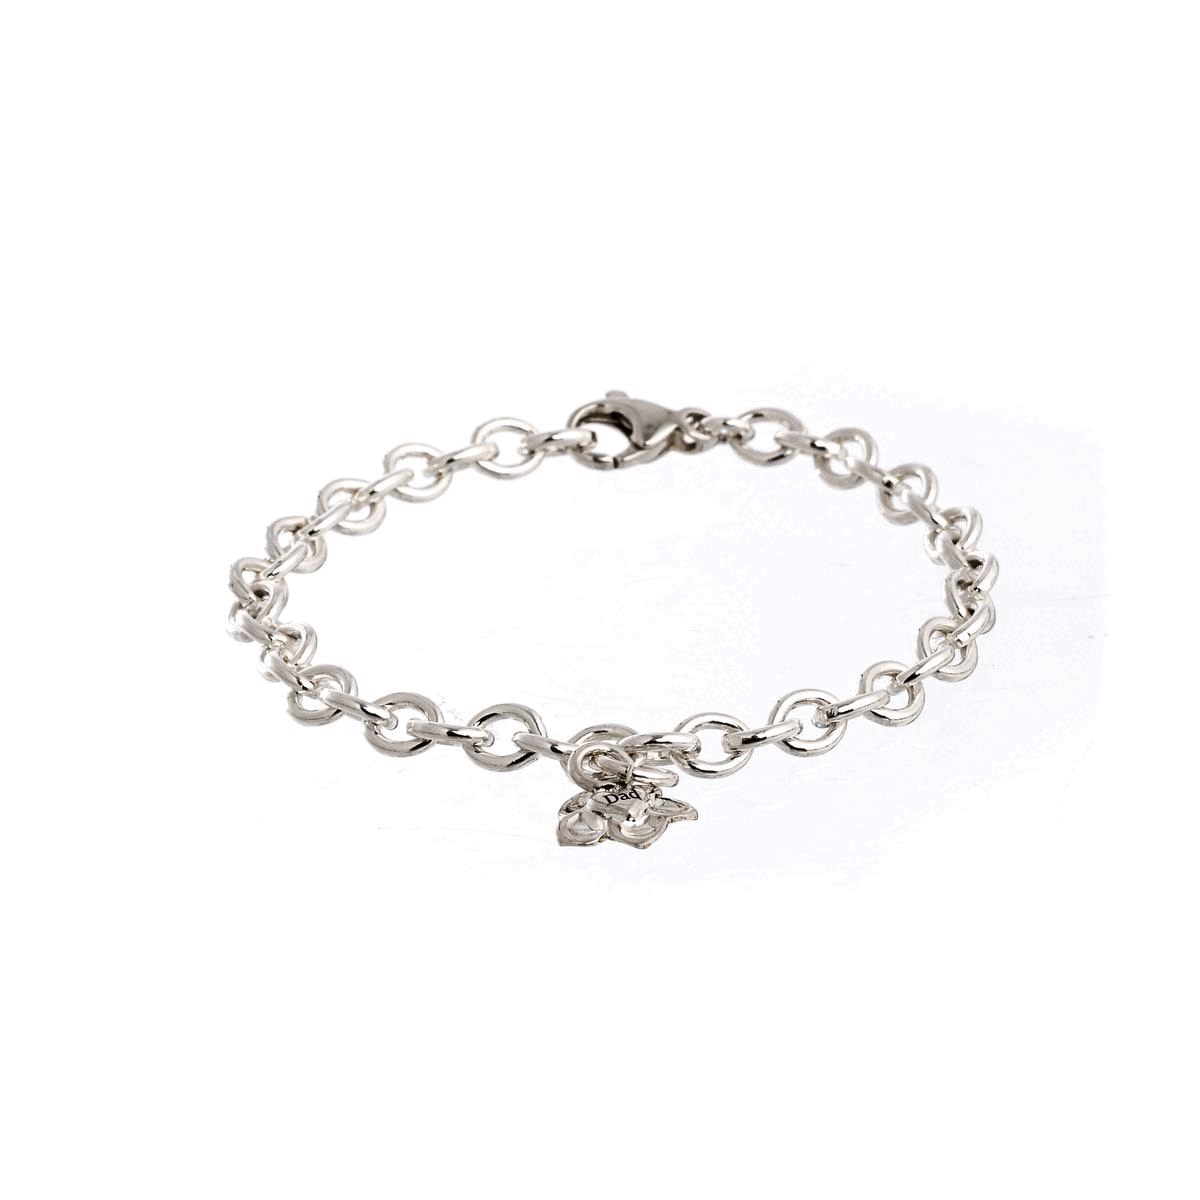 solid silver forget me not flower charm bracelet with back engraving